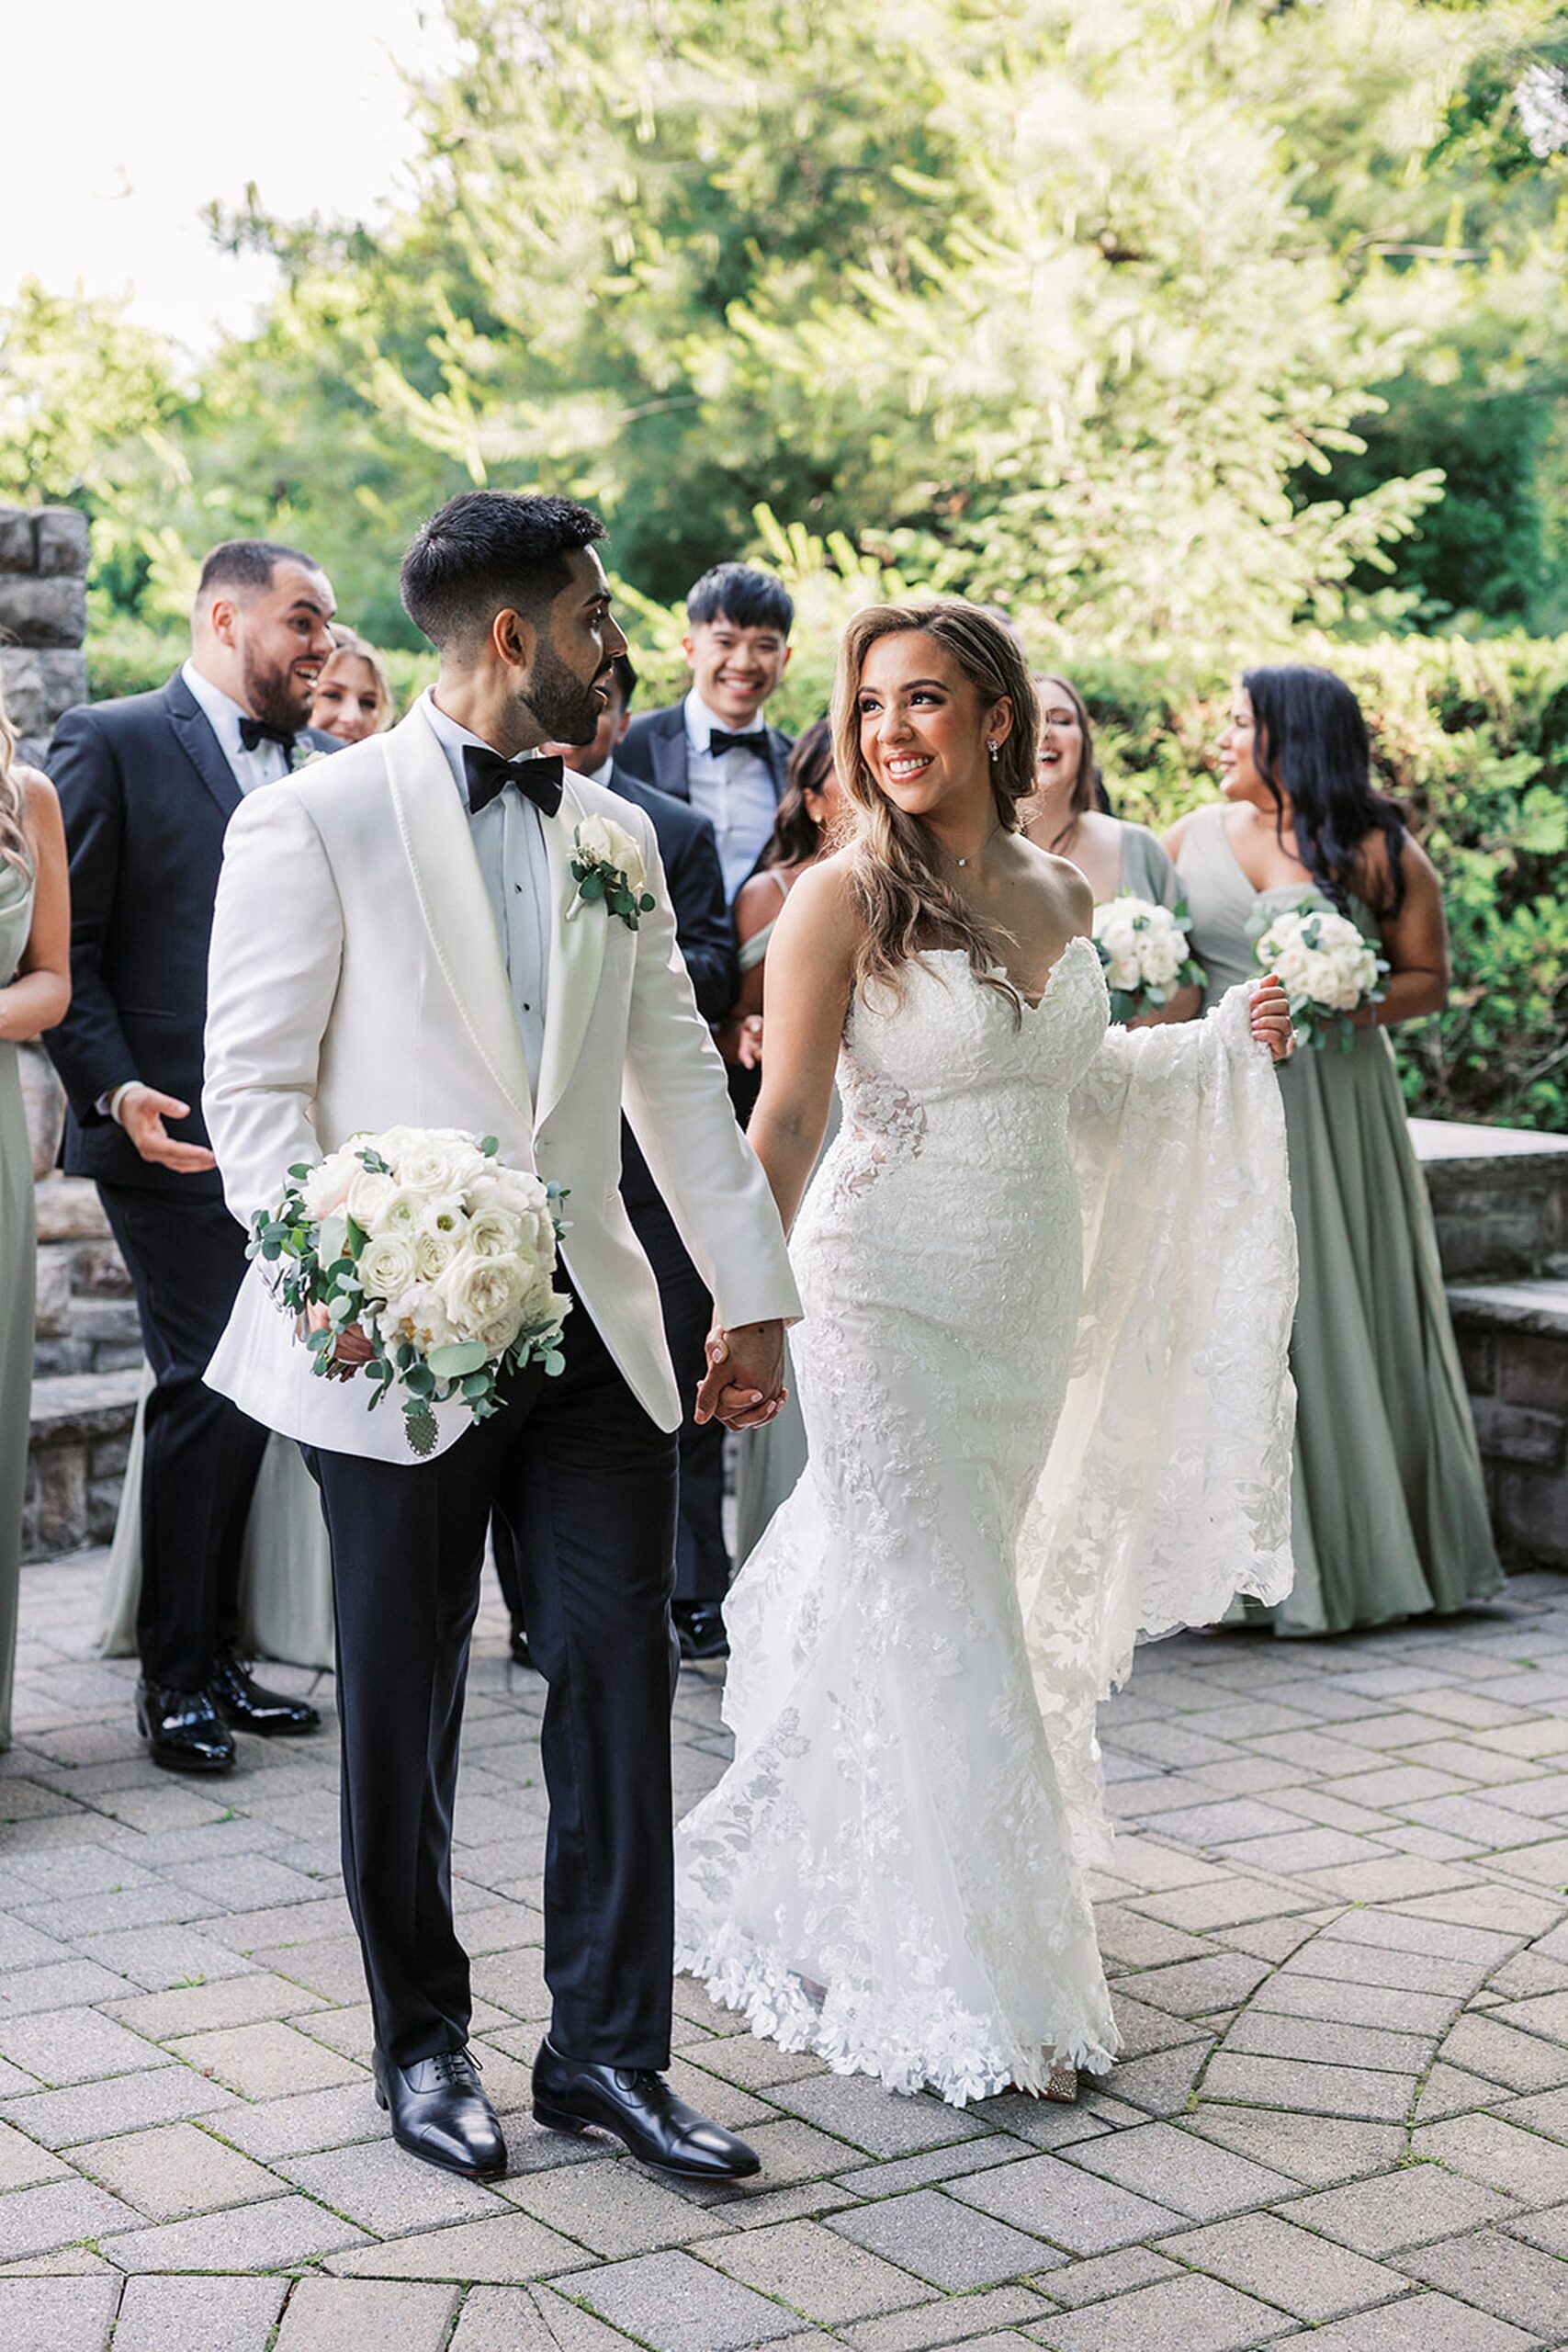 Newlyweds hold hands while walking through a garden as their wedding party laughs and celebrates behind them